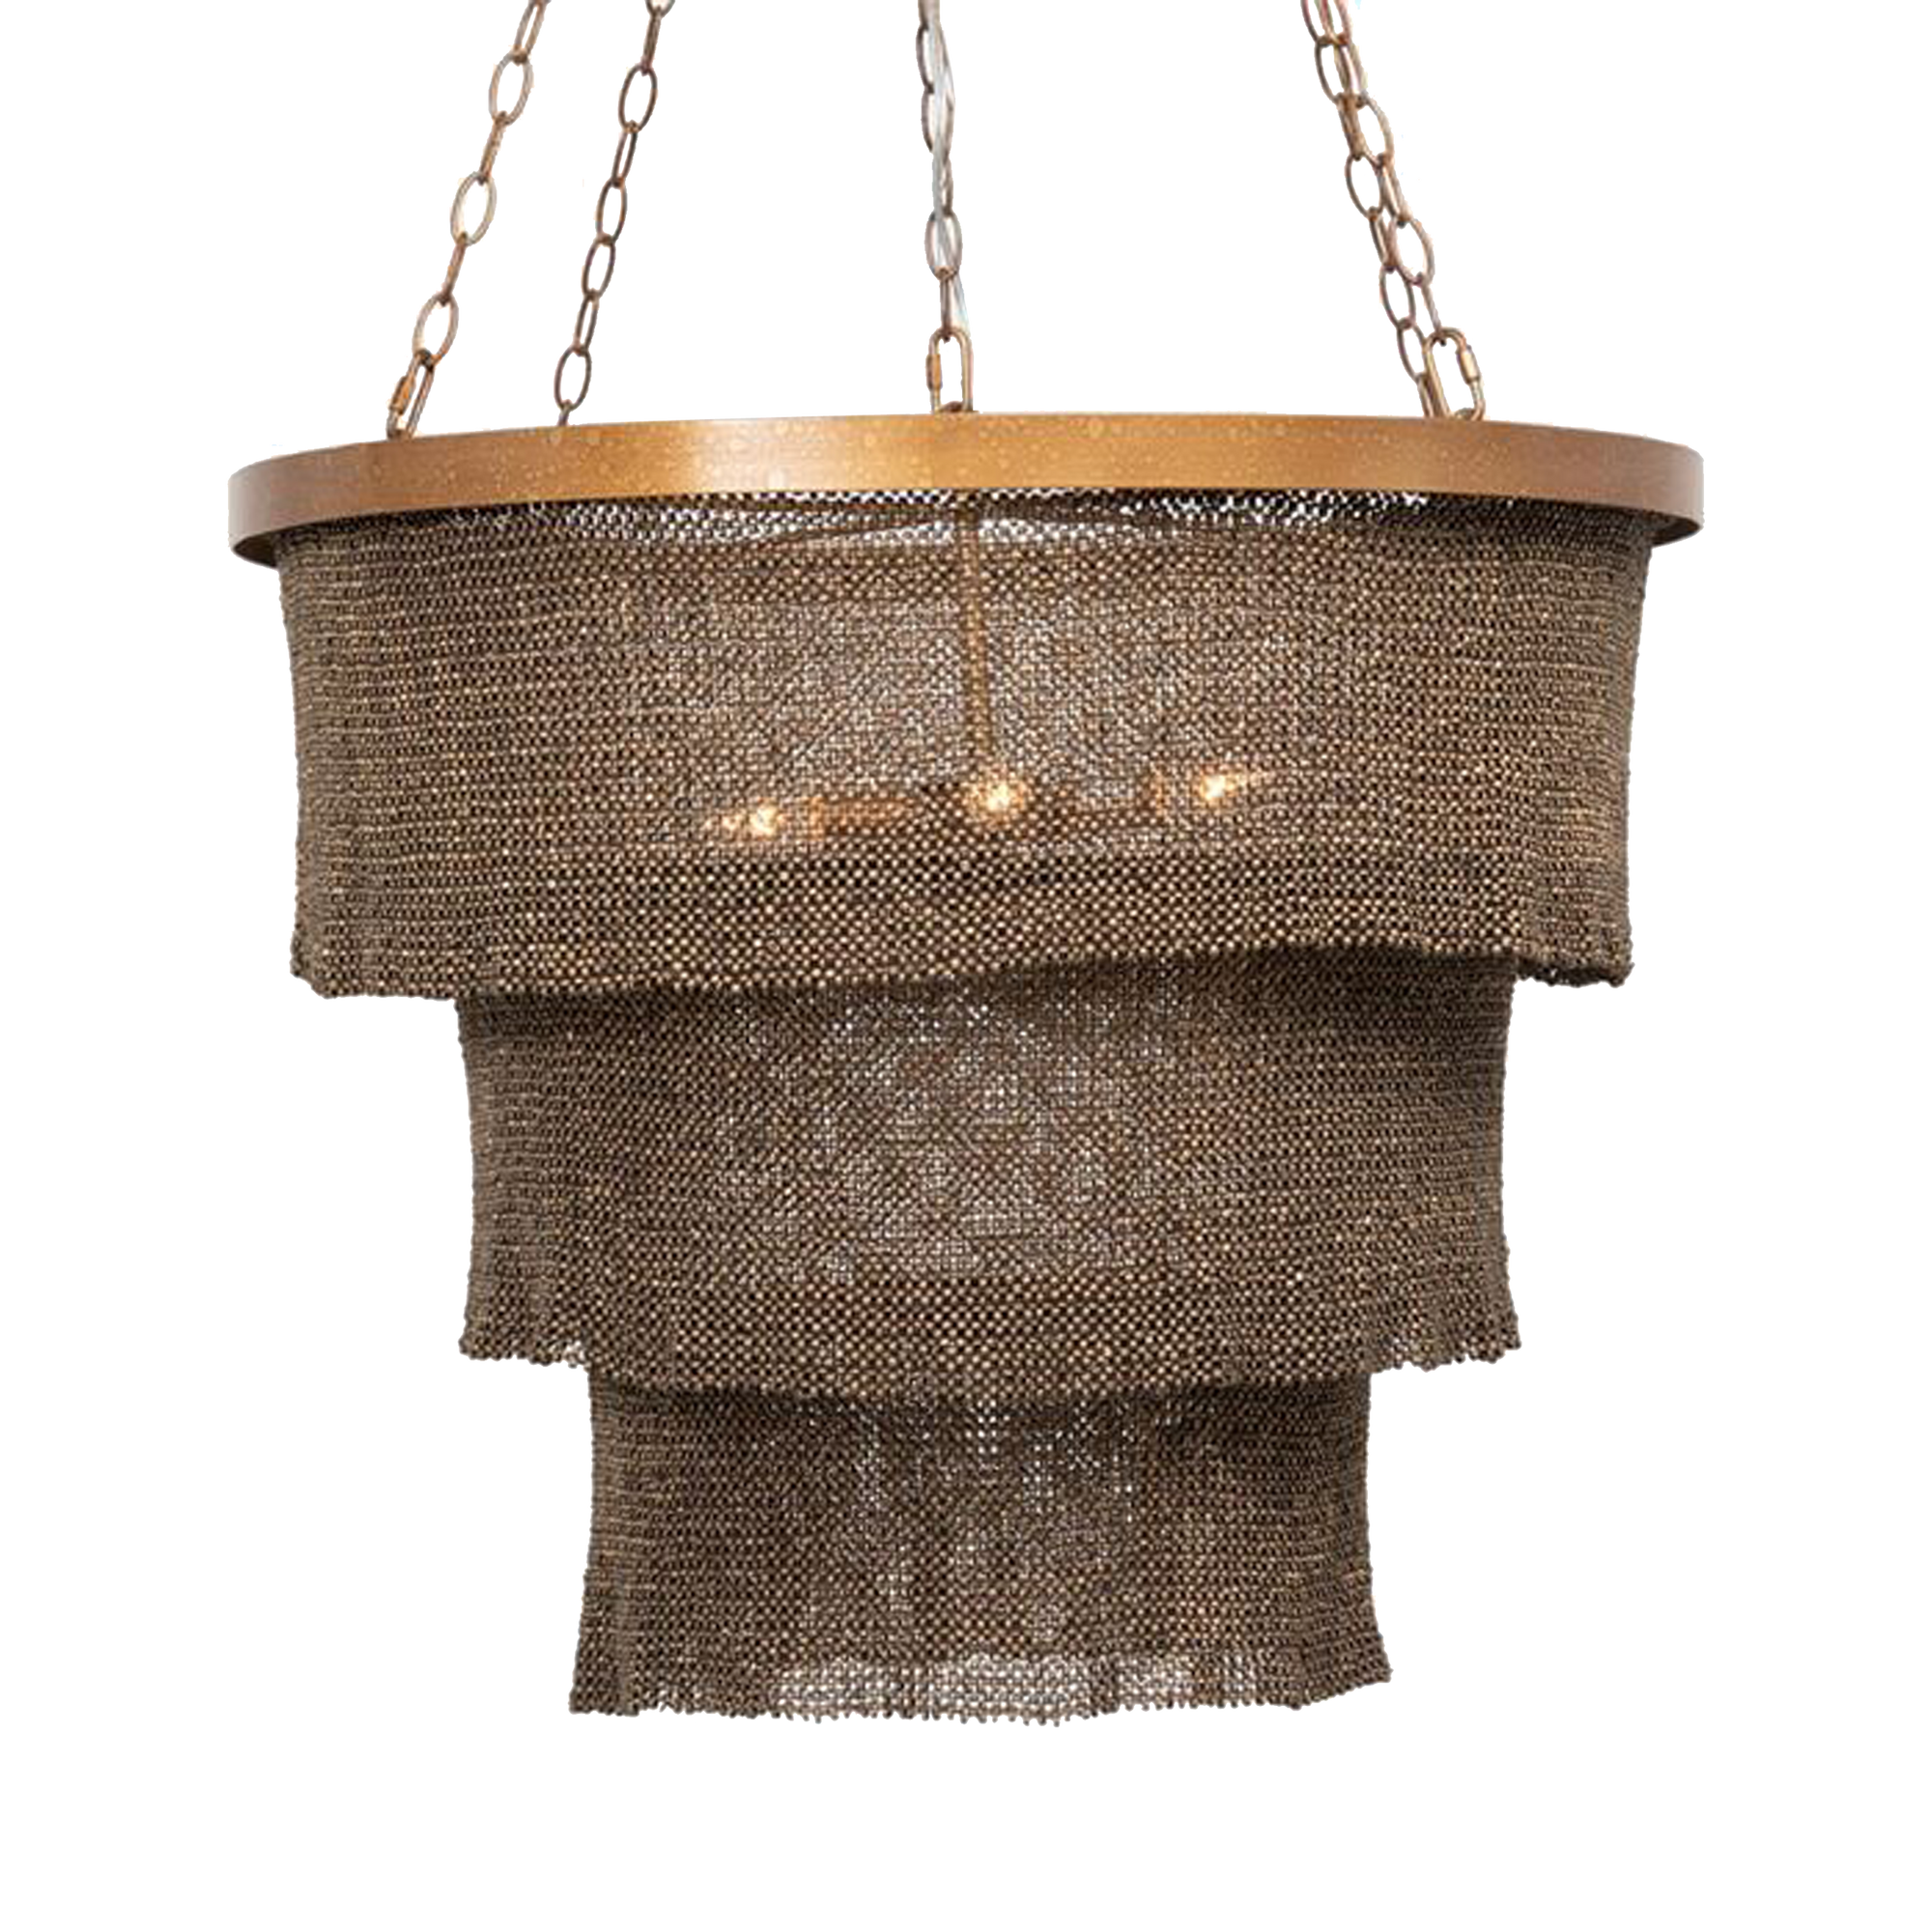 The Tiered Coco Bead Chandelier is made of woven coco beads forming three concentric rings that drop and overlap one another with a ruffle edge.